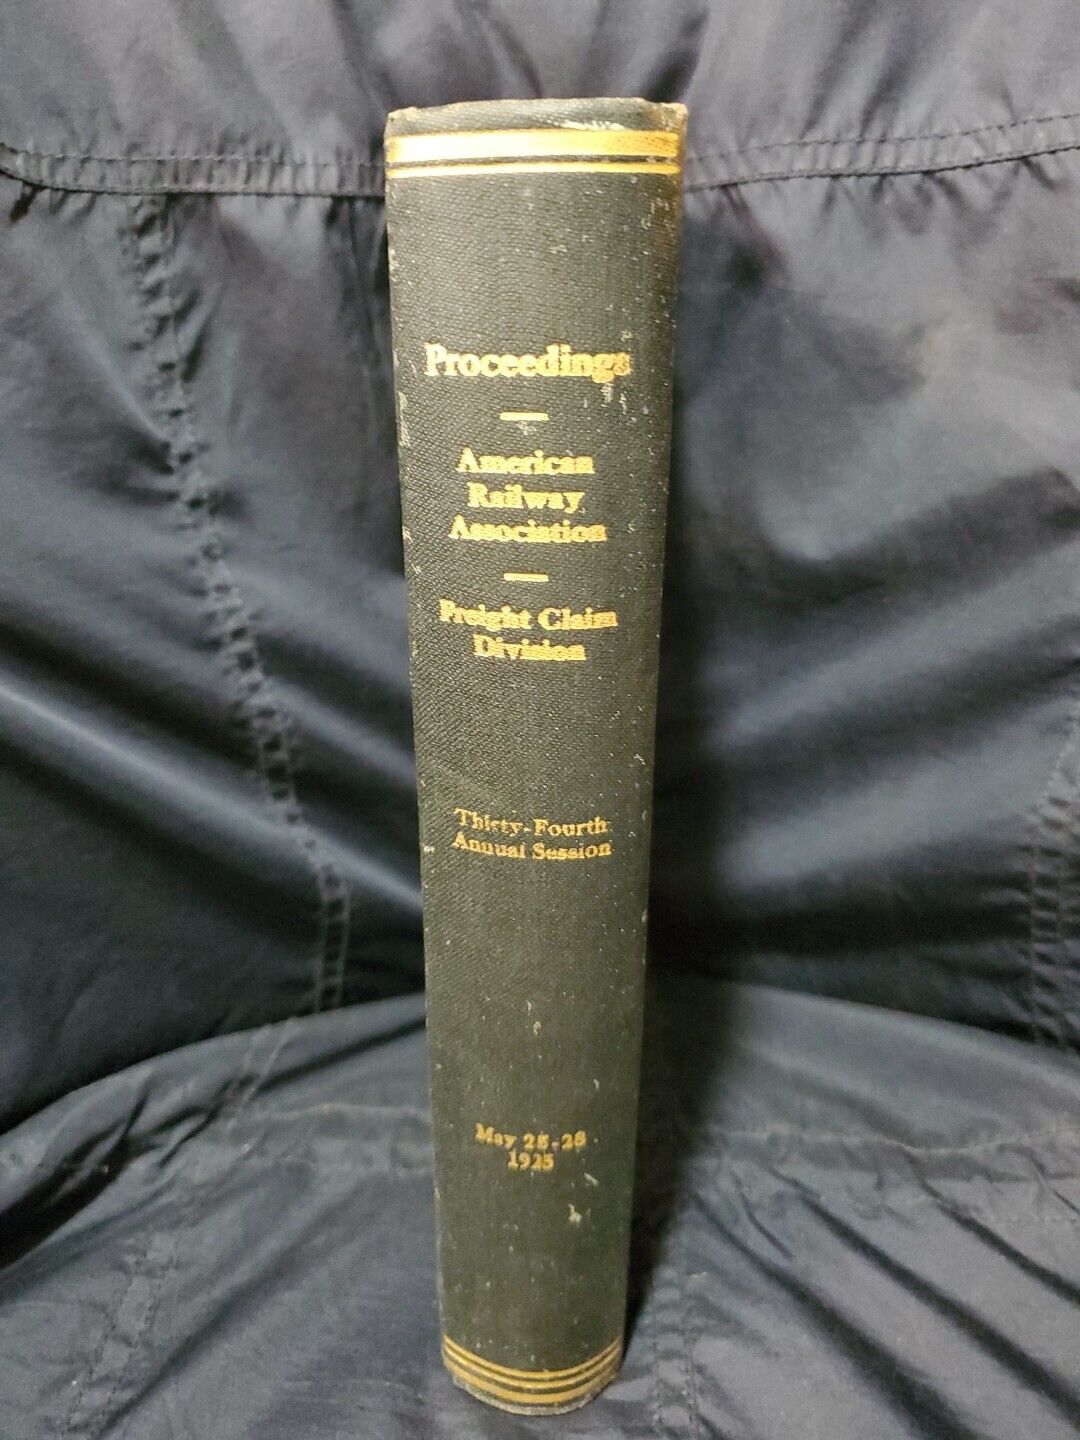 American Railway Association Freight Claim Div Proceedings of 34th Session 1925